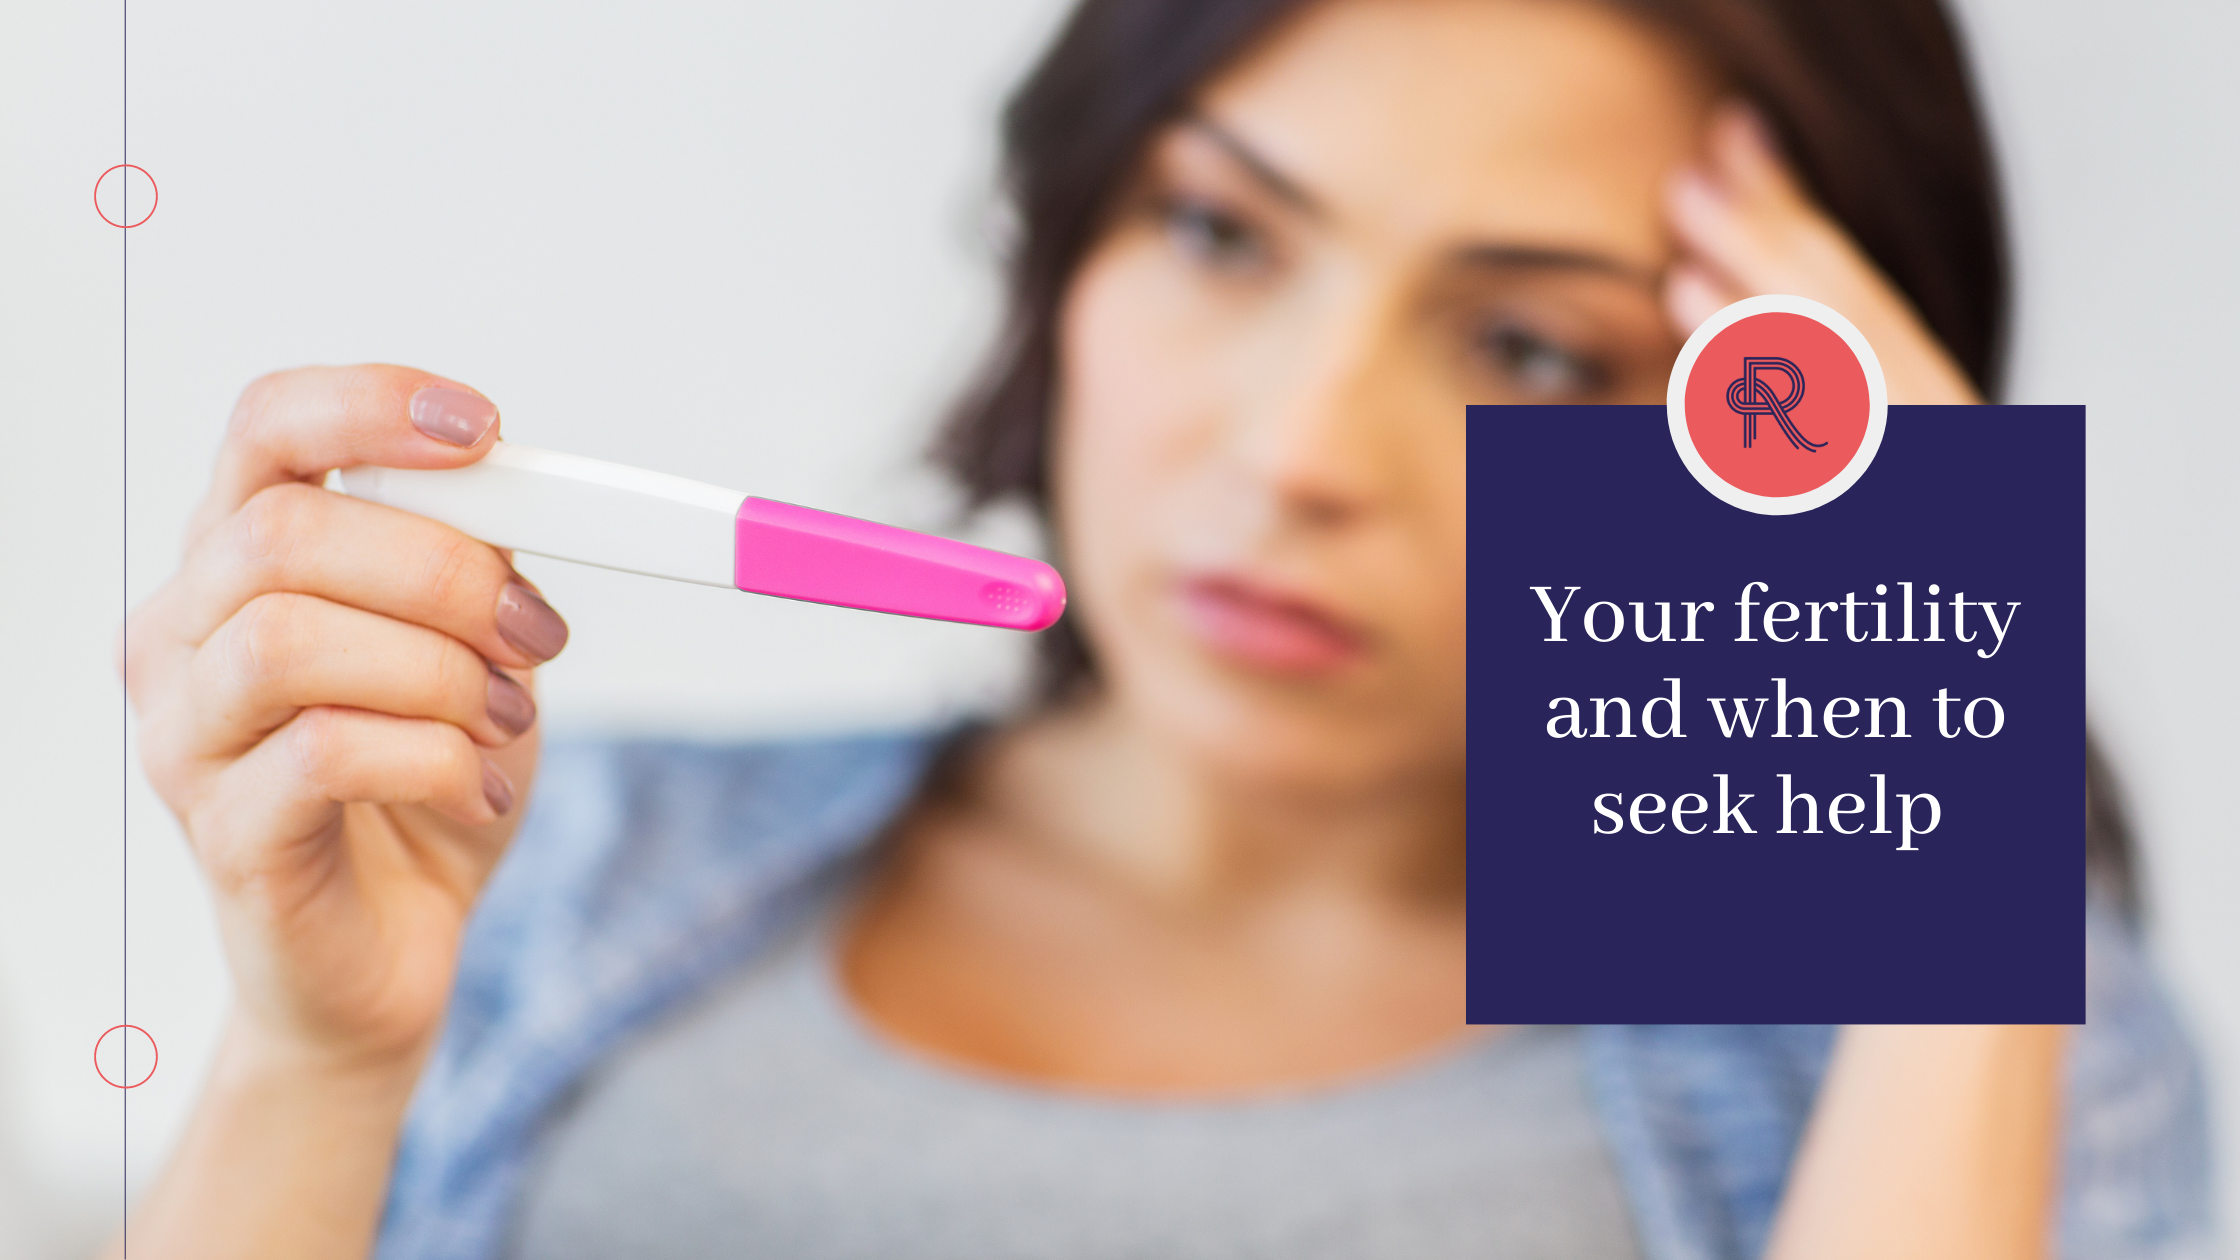 Your fertility and when to seek help